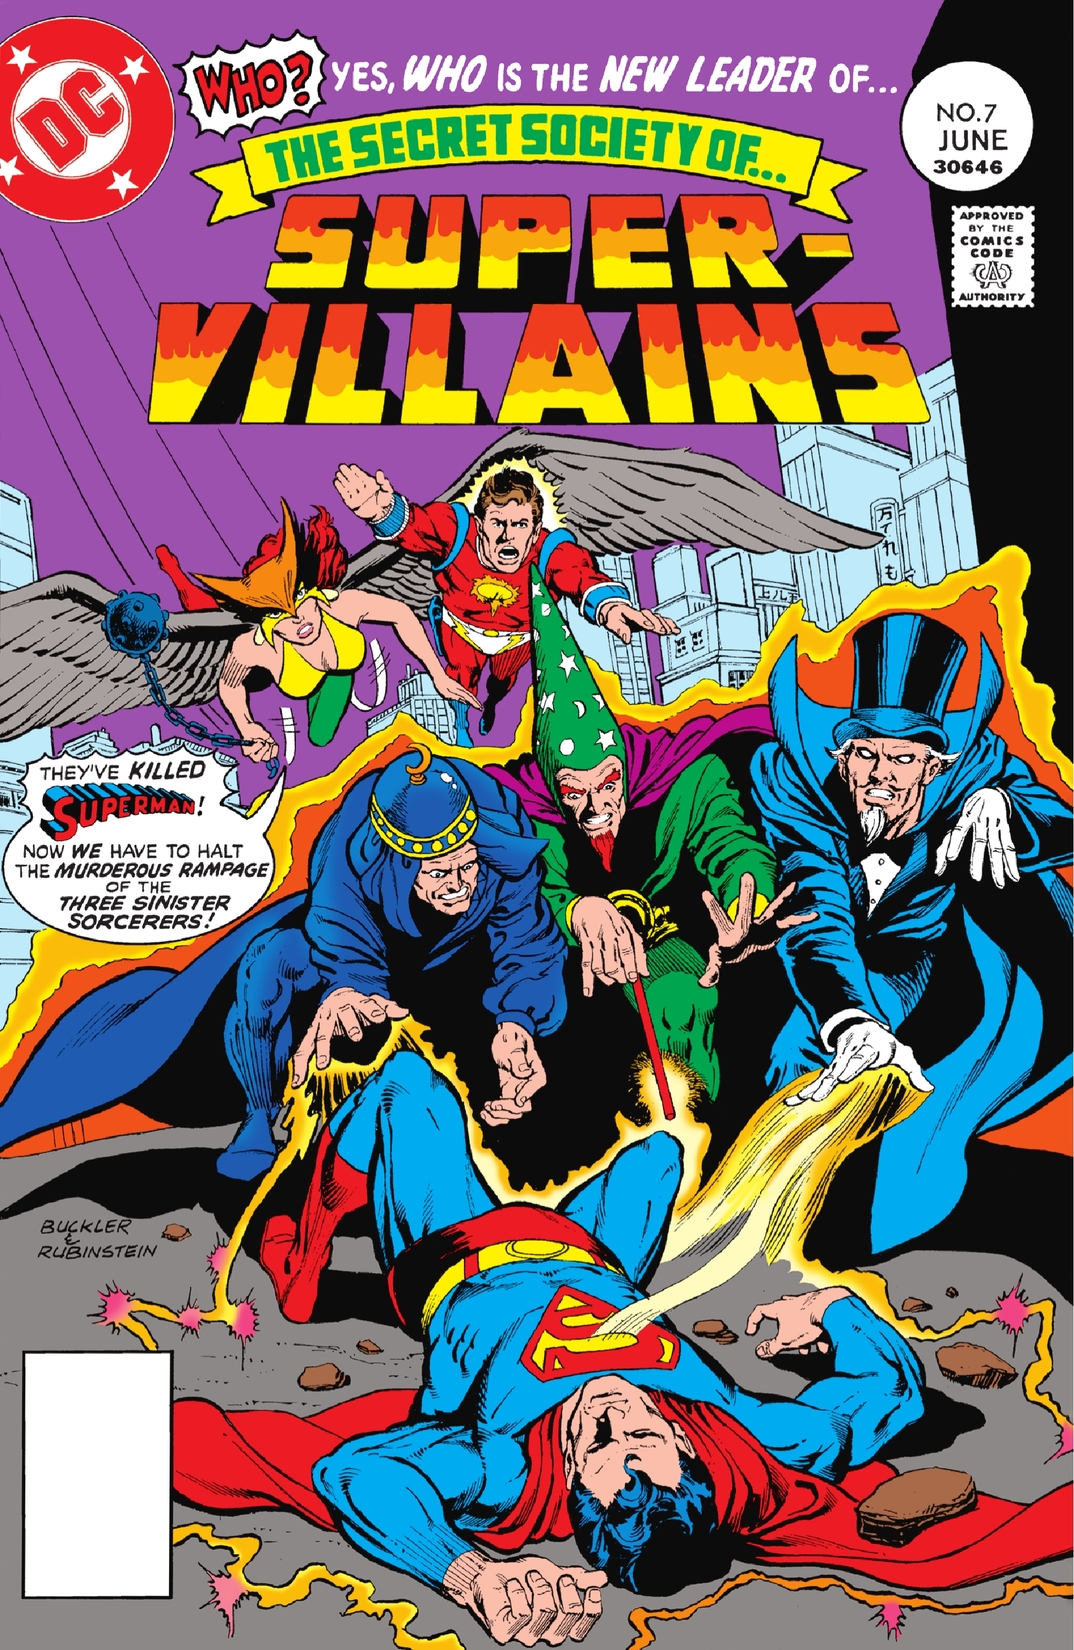 The Secret Society of Super-Villains #7 preview images